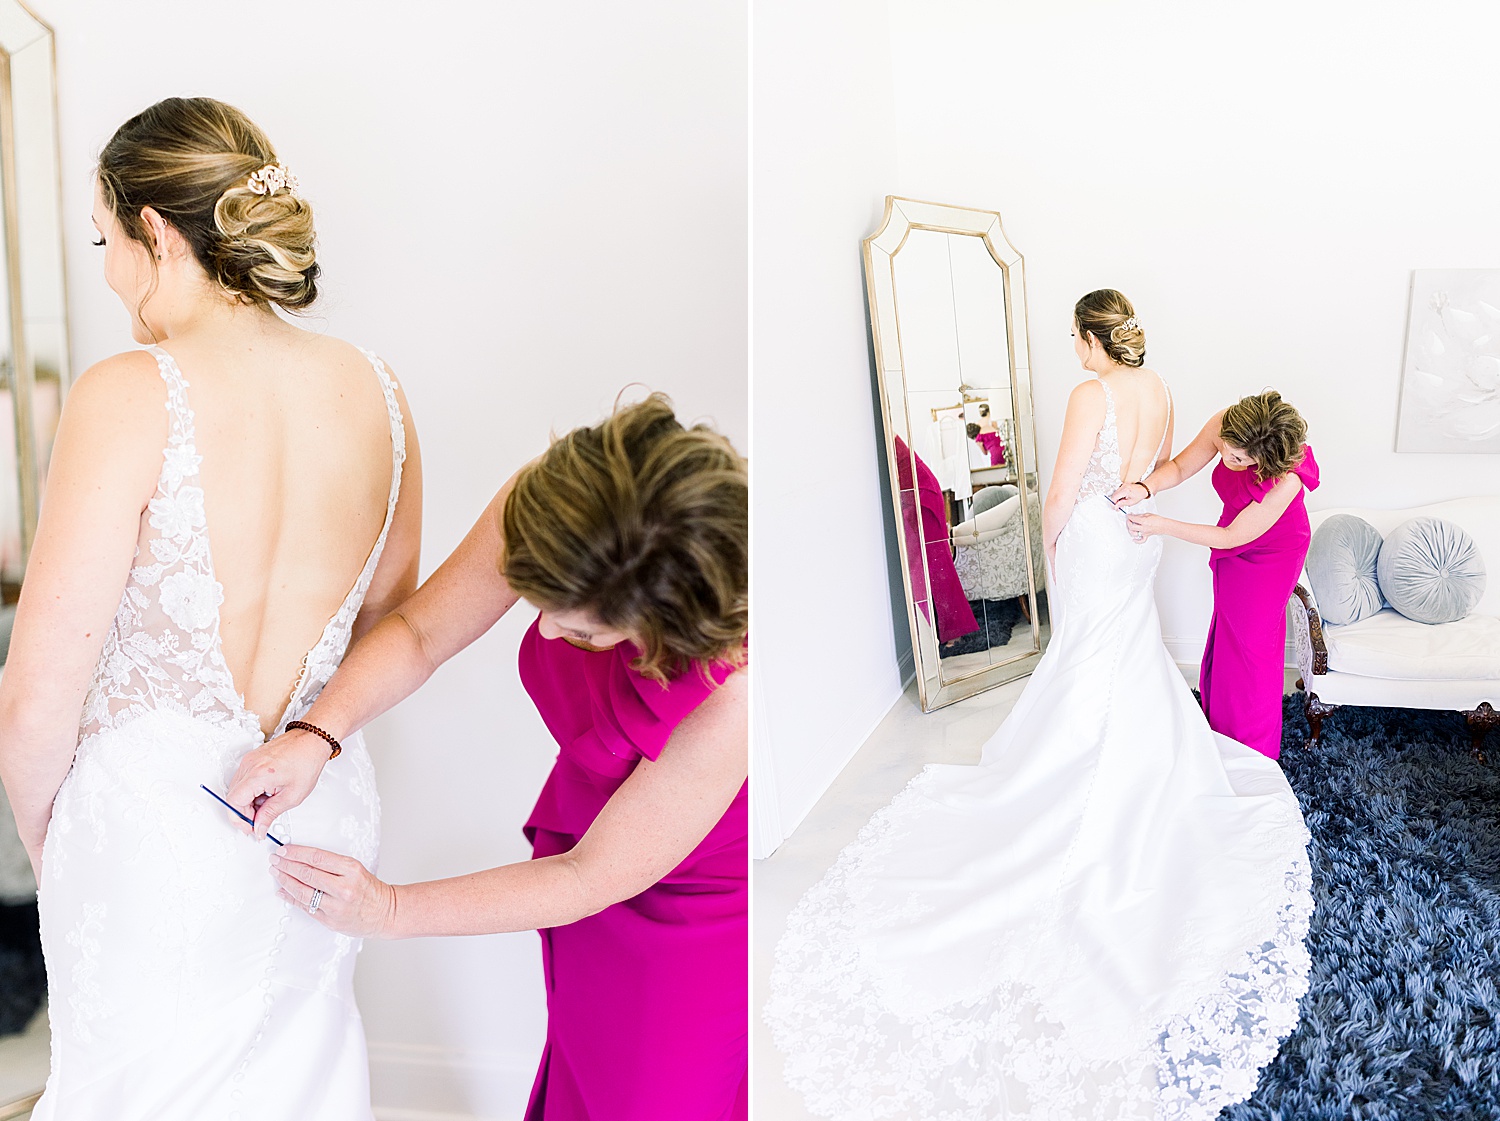 Mother of the Bride helping daughter with wedding dress